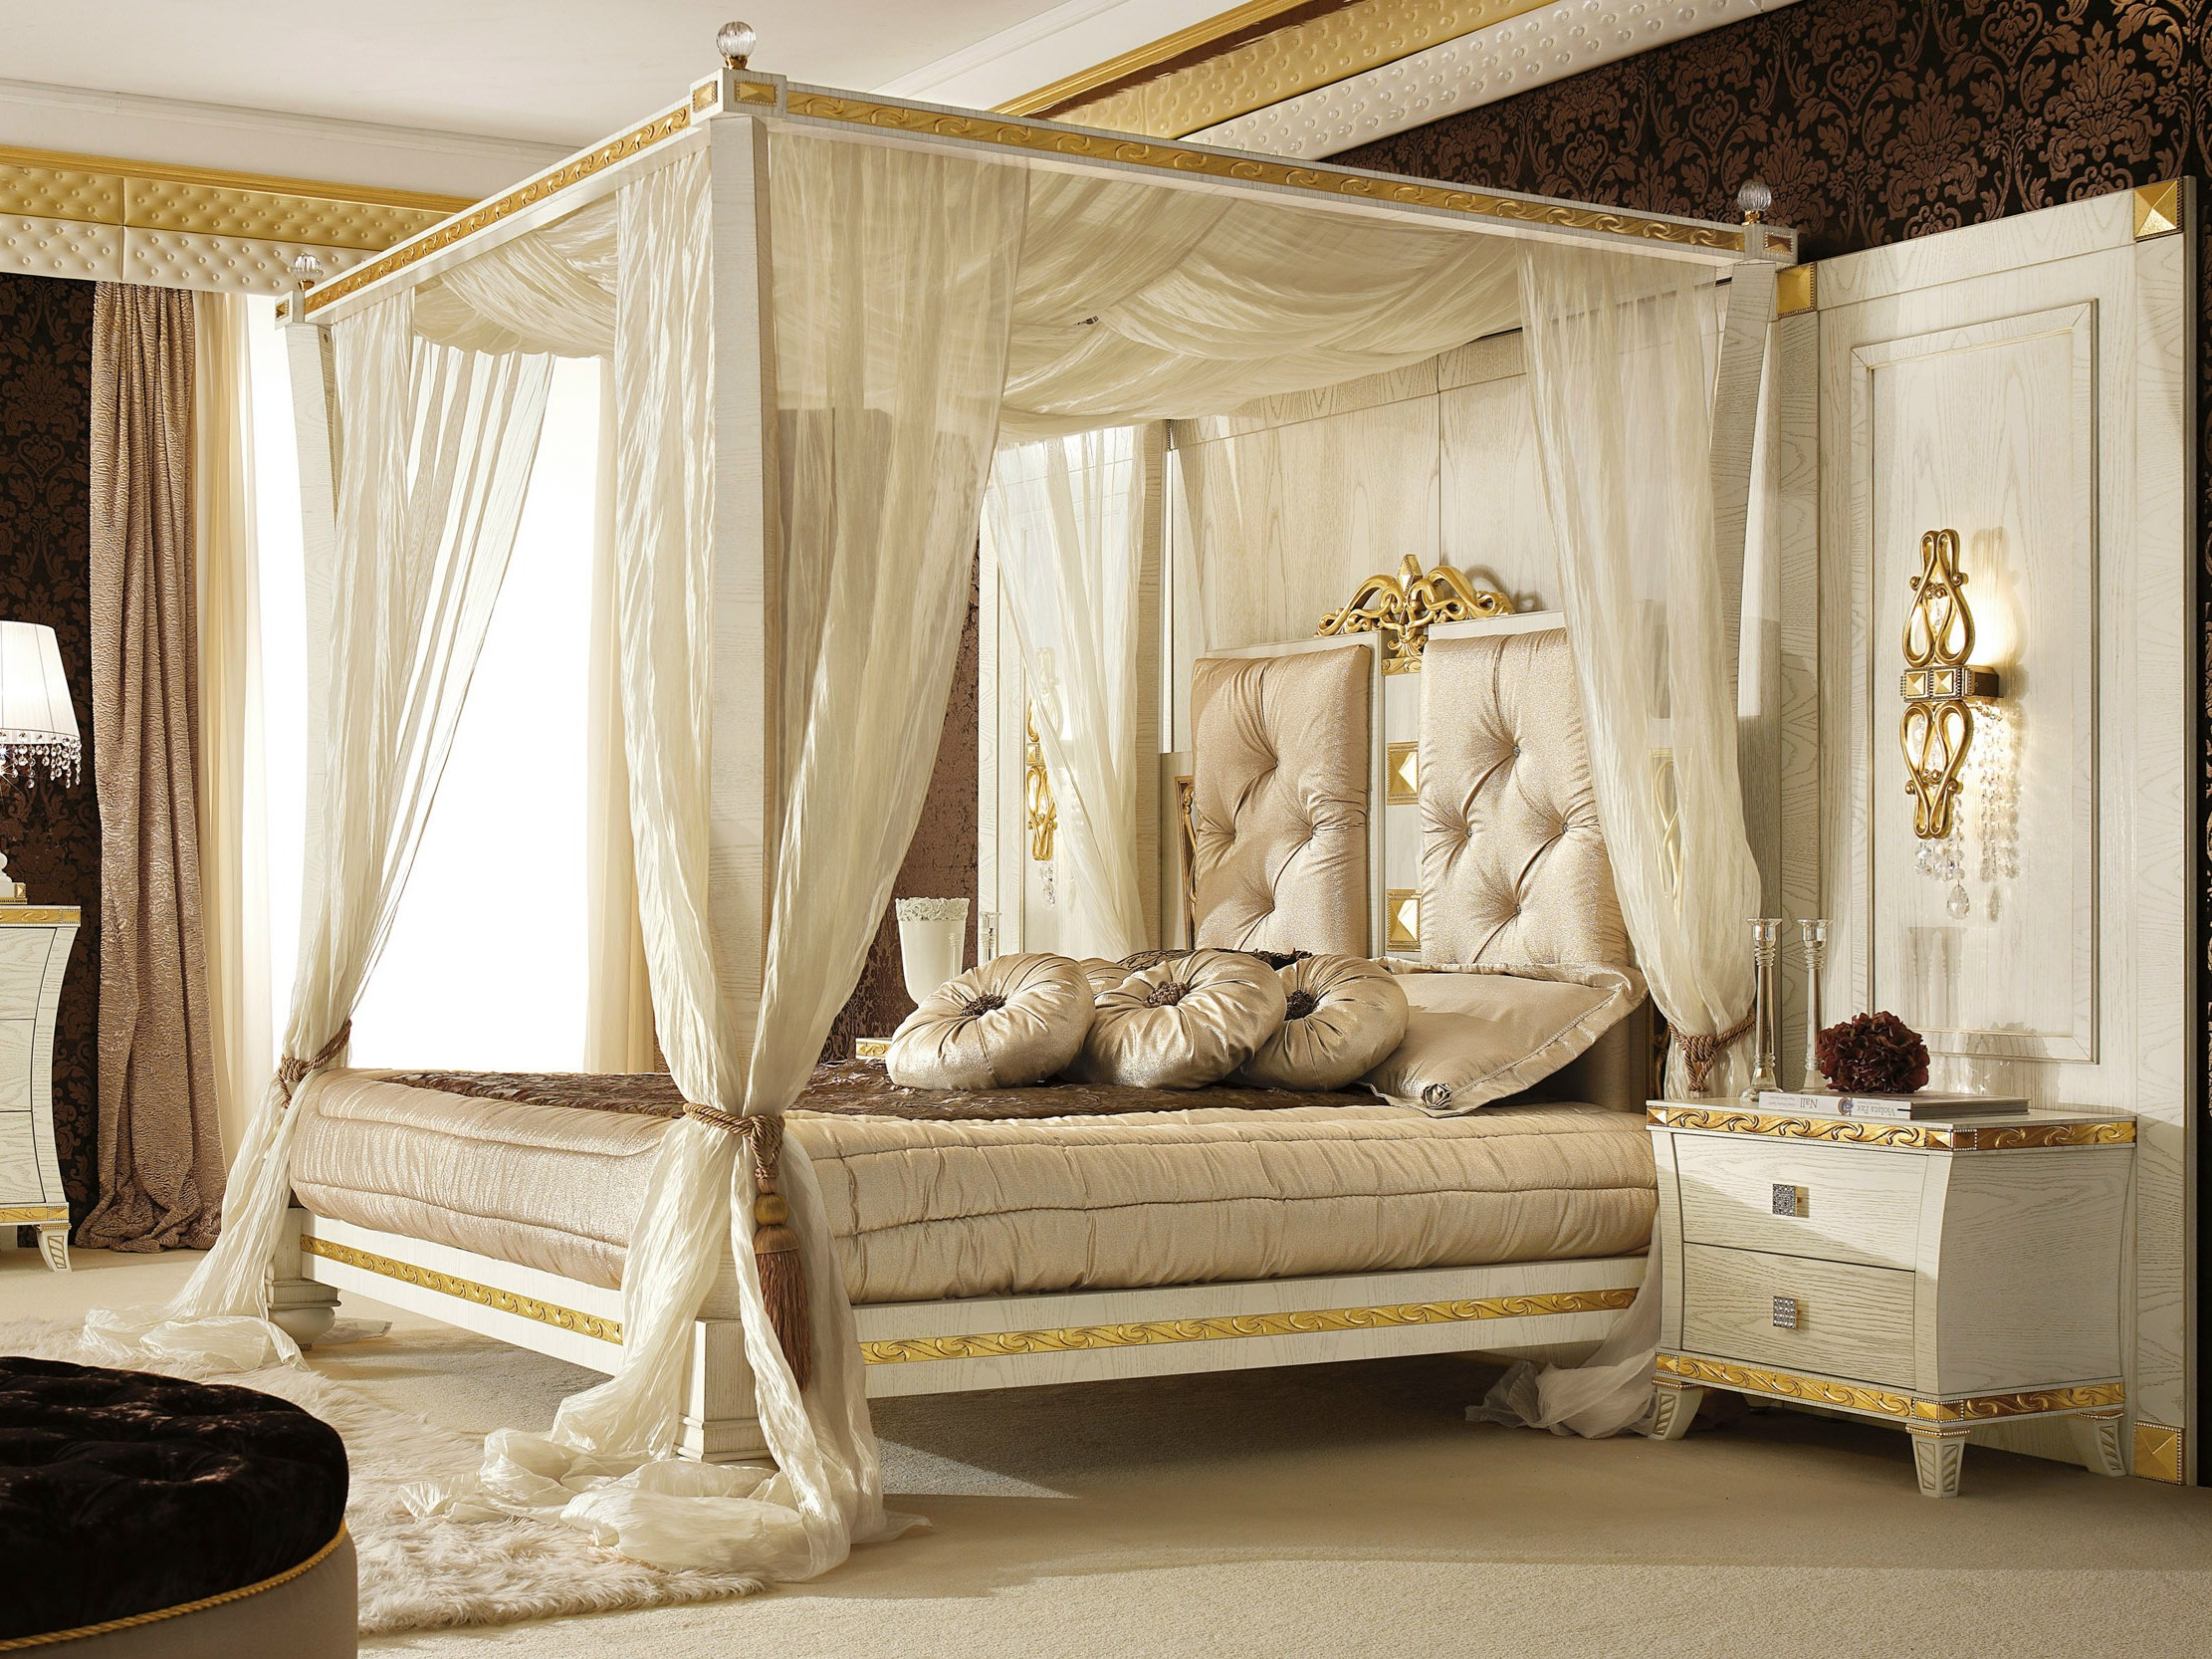 Canopy Bedroom Sets With Curtains Residence Various Bedroo 14860 for measurements 2222 X 1666